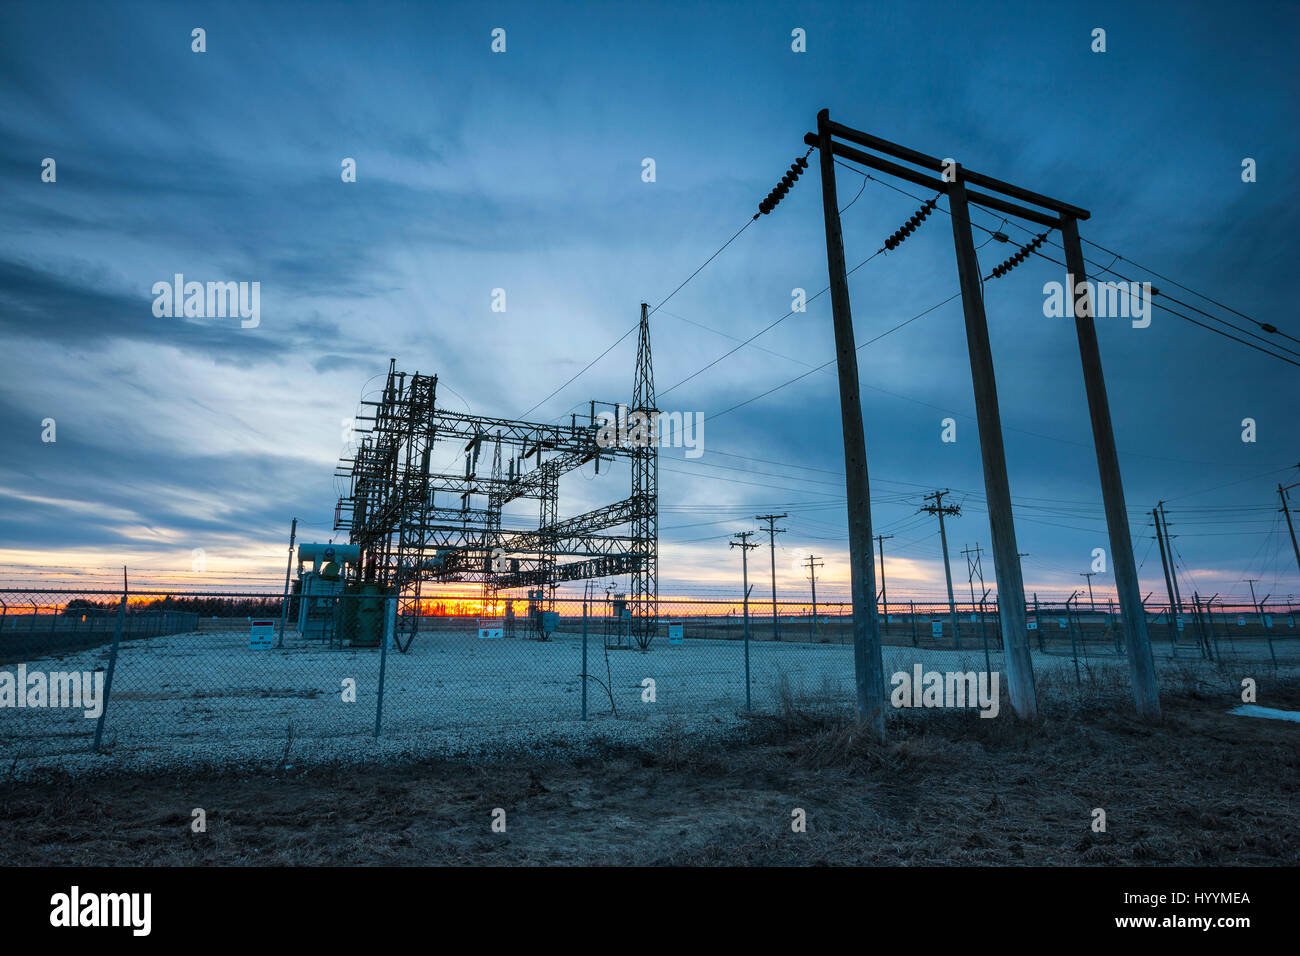 Electrical sub station at sunset Stock Photo